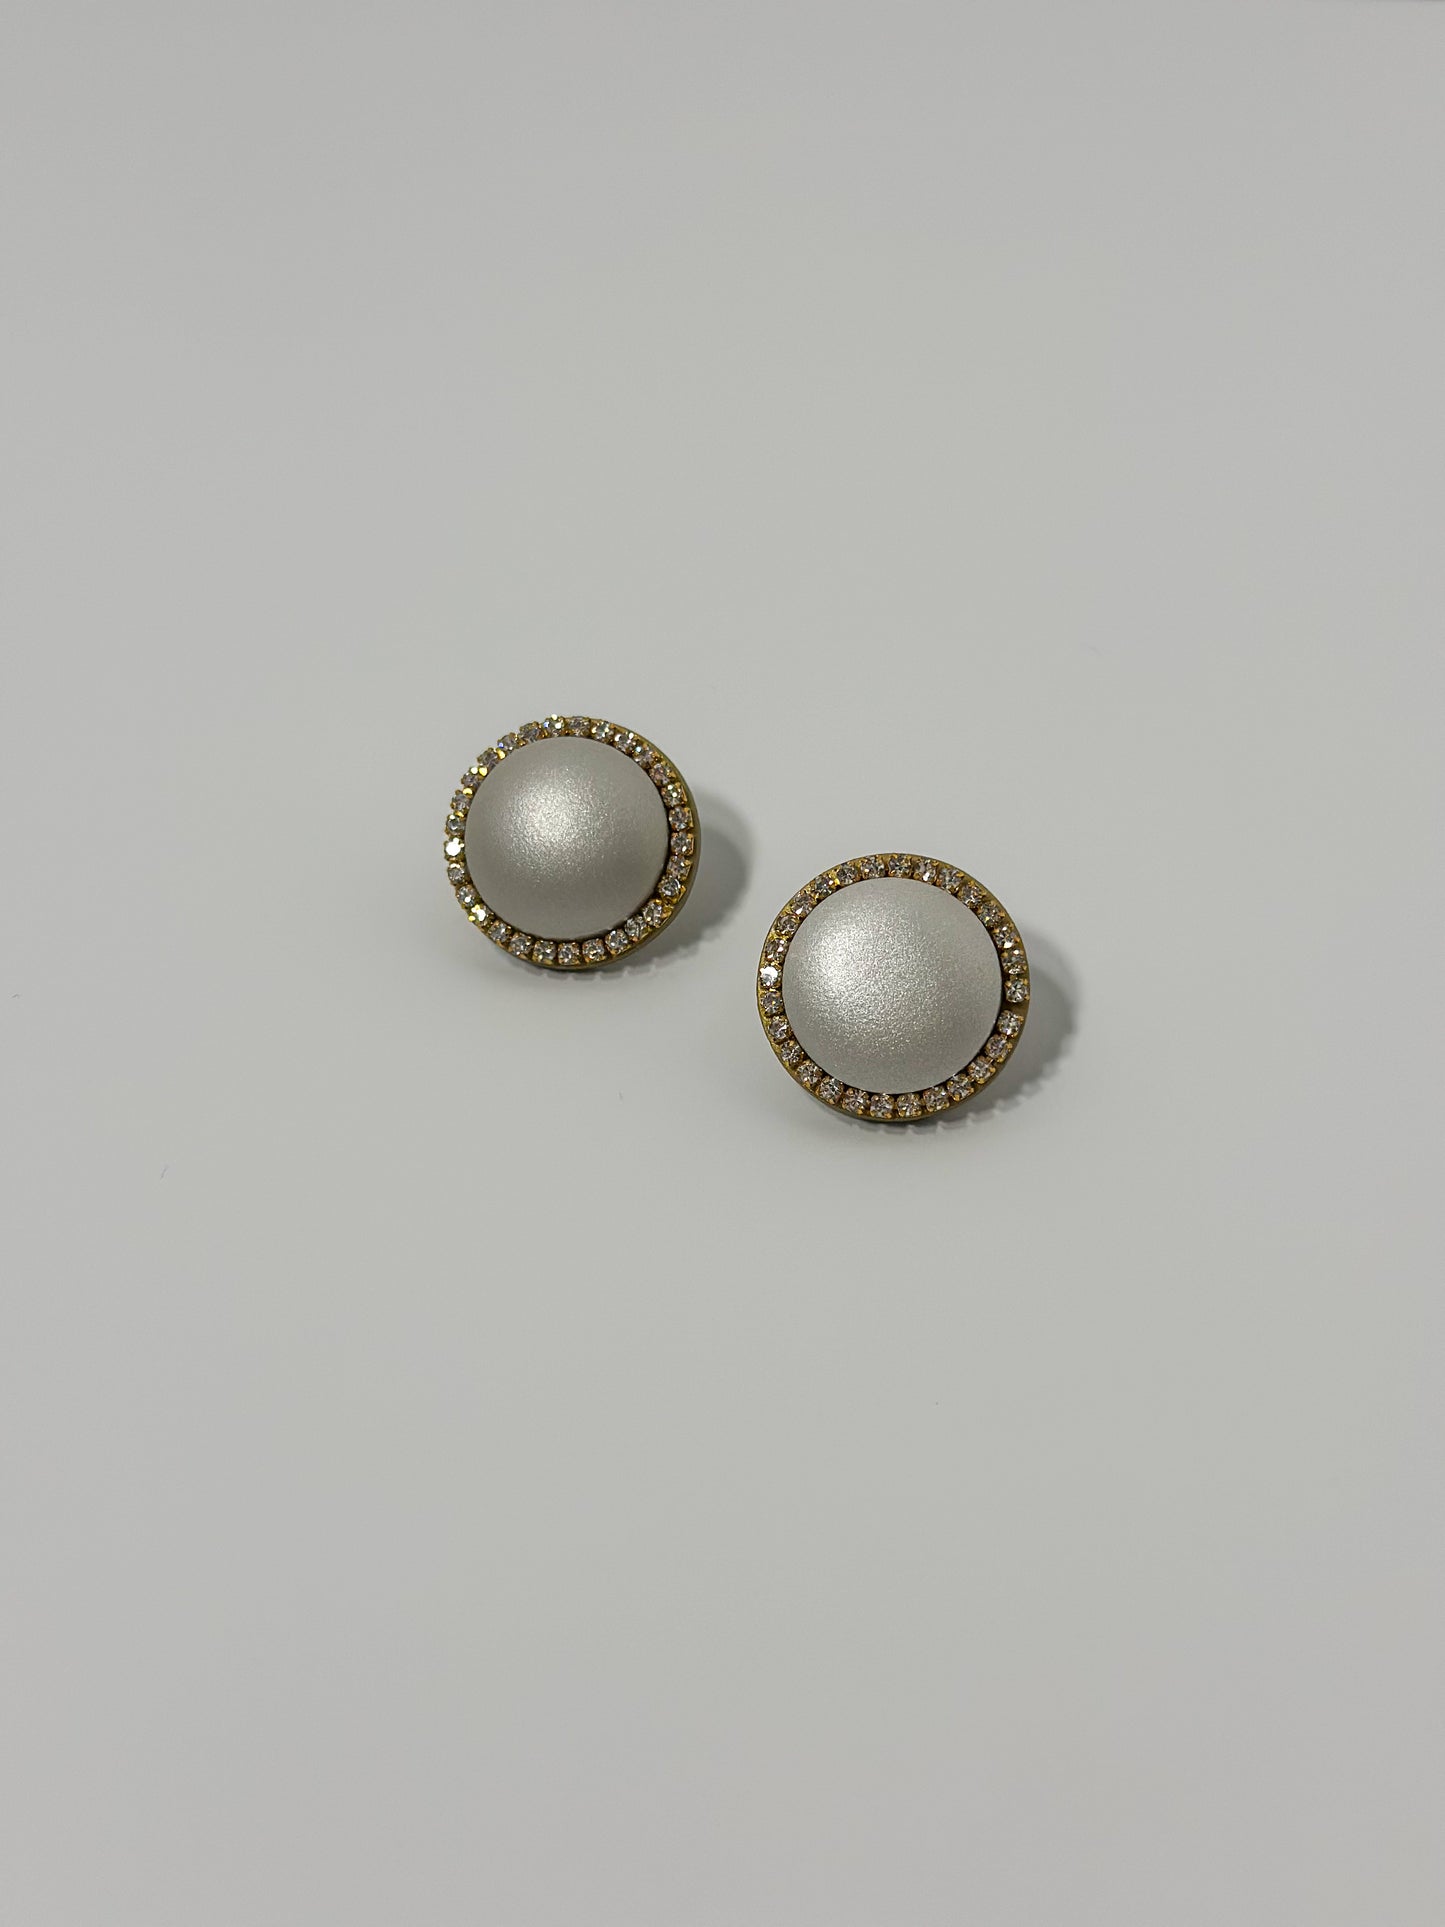 Artfully sculpted clay mimics a pearl in the center, surrounded by sparkling glass rhinestones to create these beautifully handmade earrings.